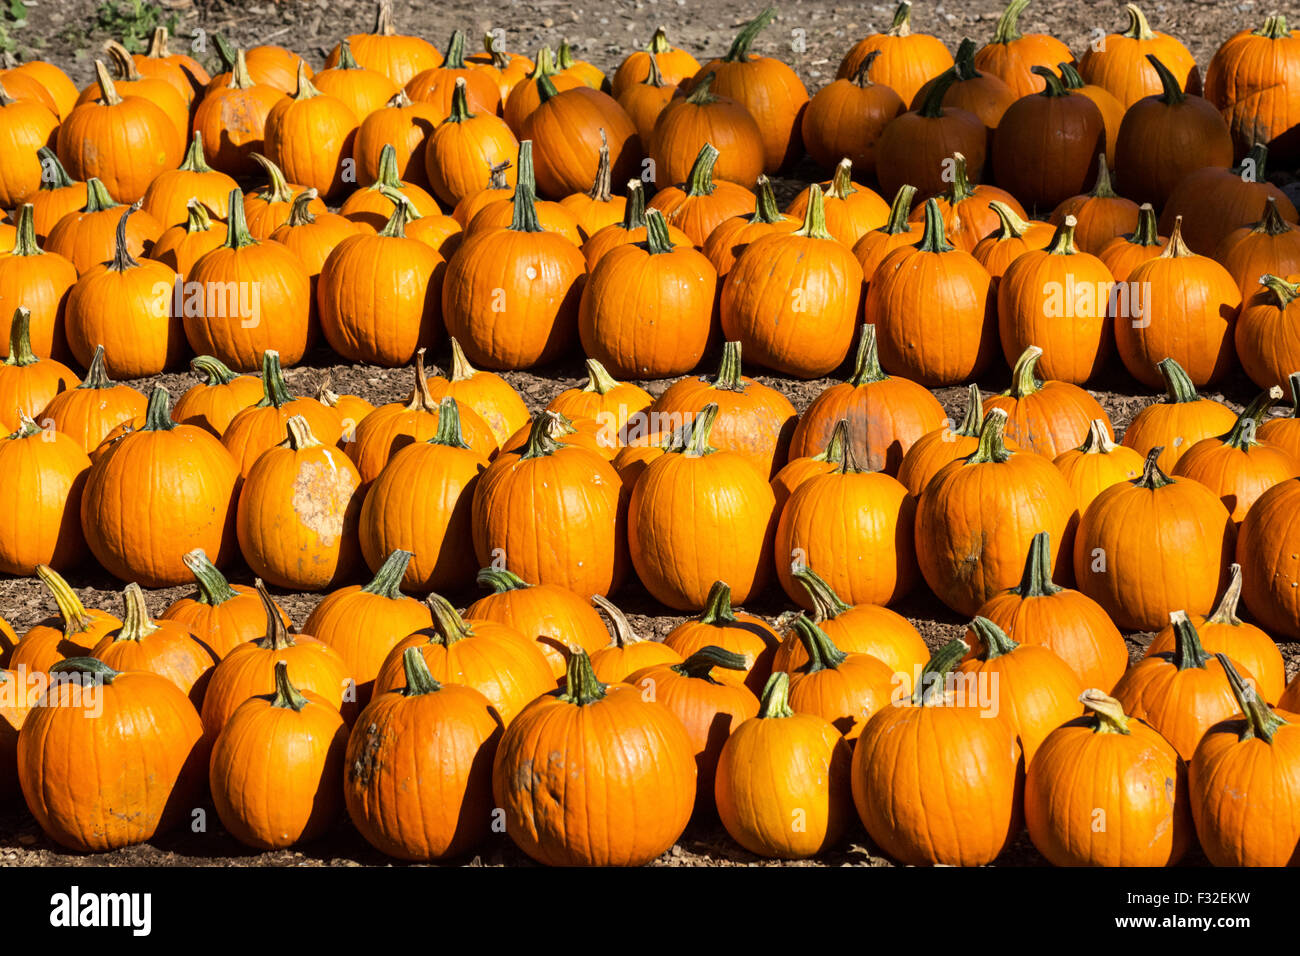 Pumpkins on sale in early autumn (fall), New England, USA Stock Photo